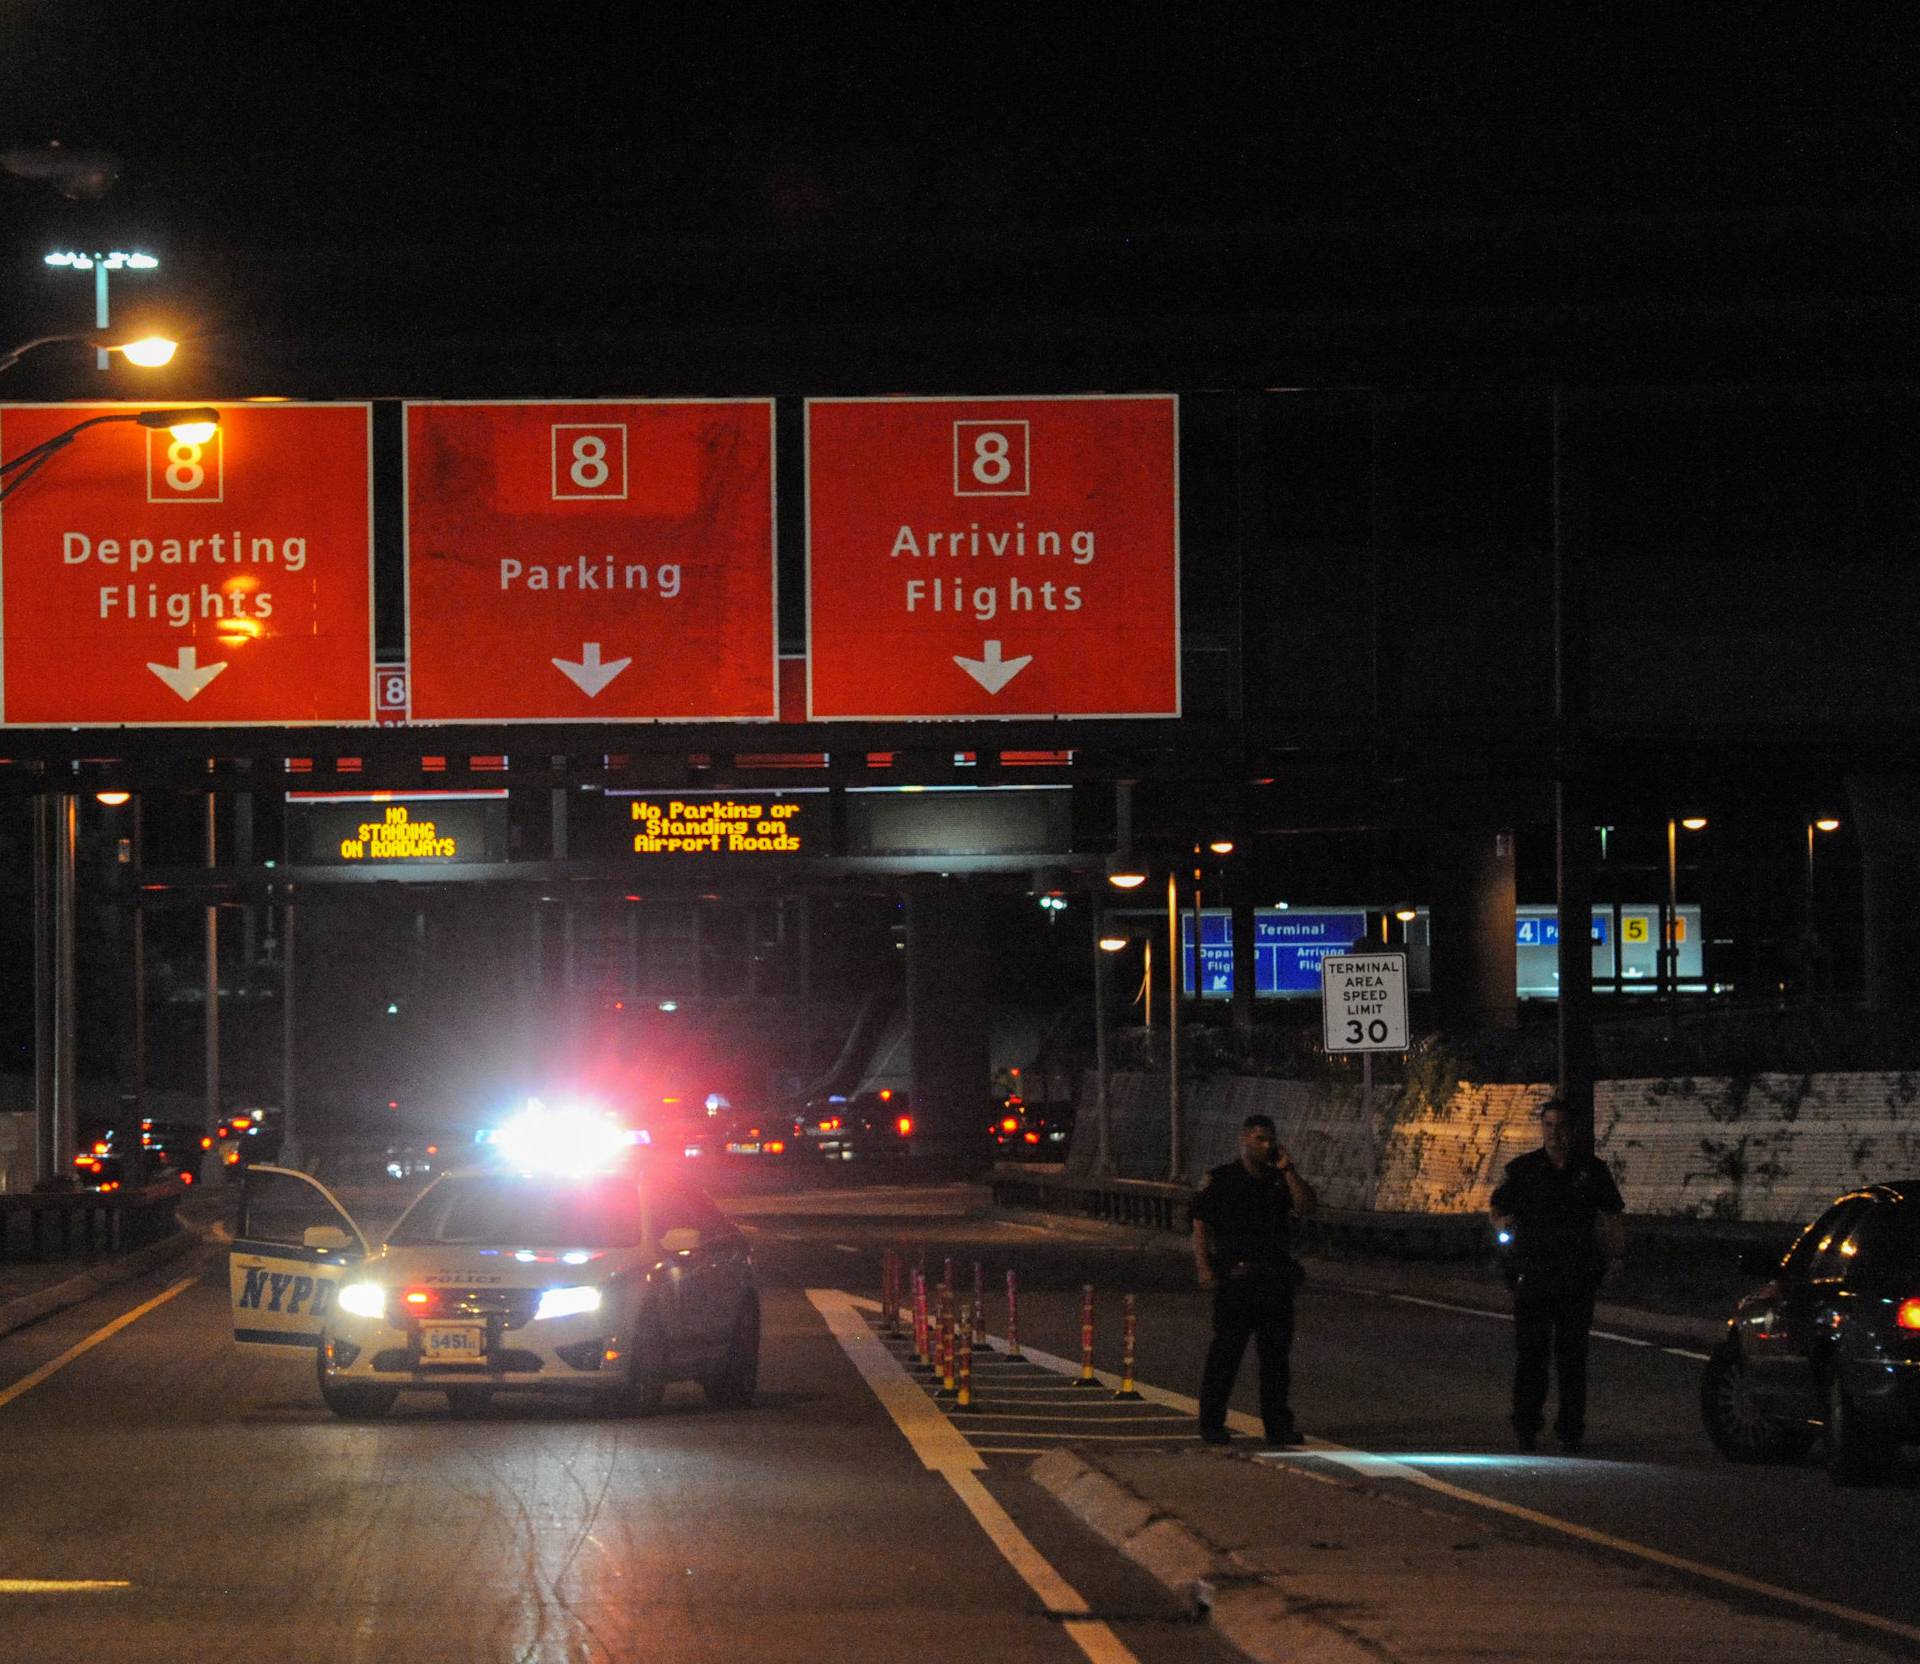 Members of the New York City Police Department block vehicle access to Terminal 8 at John F. Kennedy airport in the Queens borough of New York City